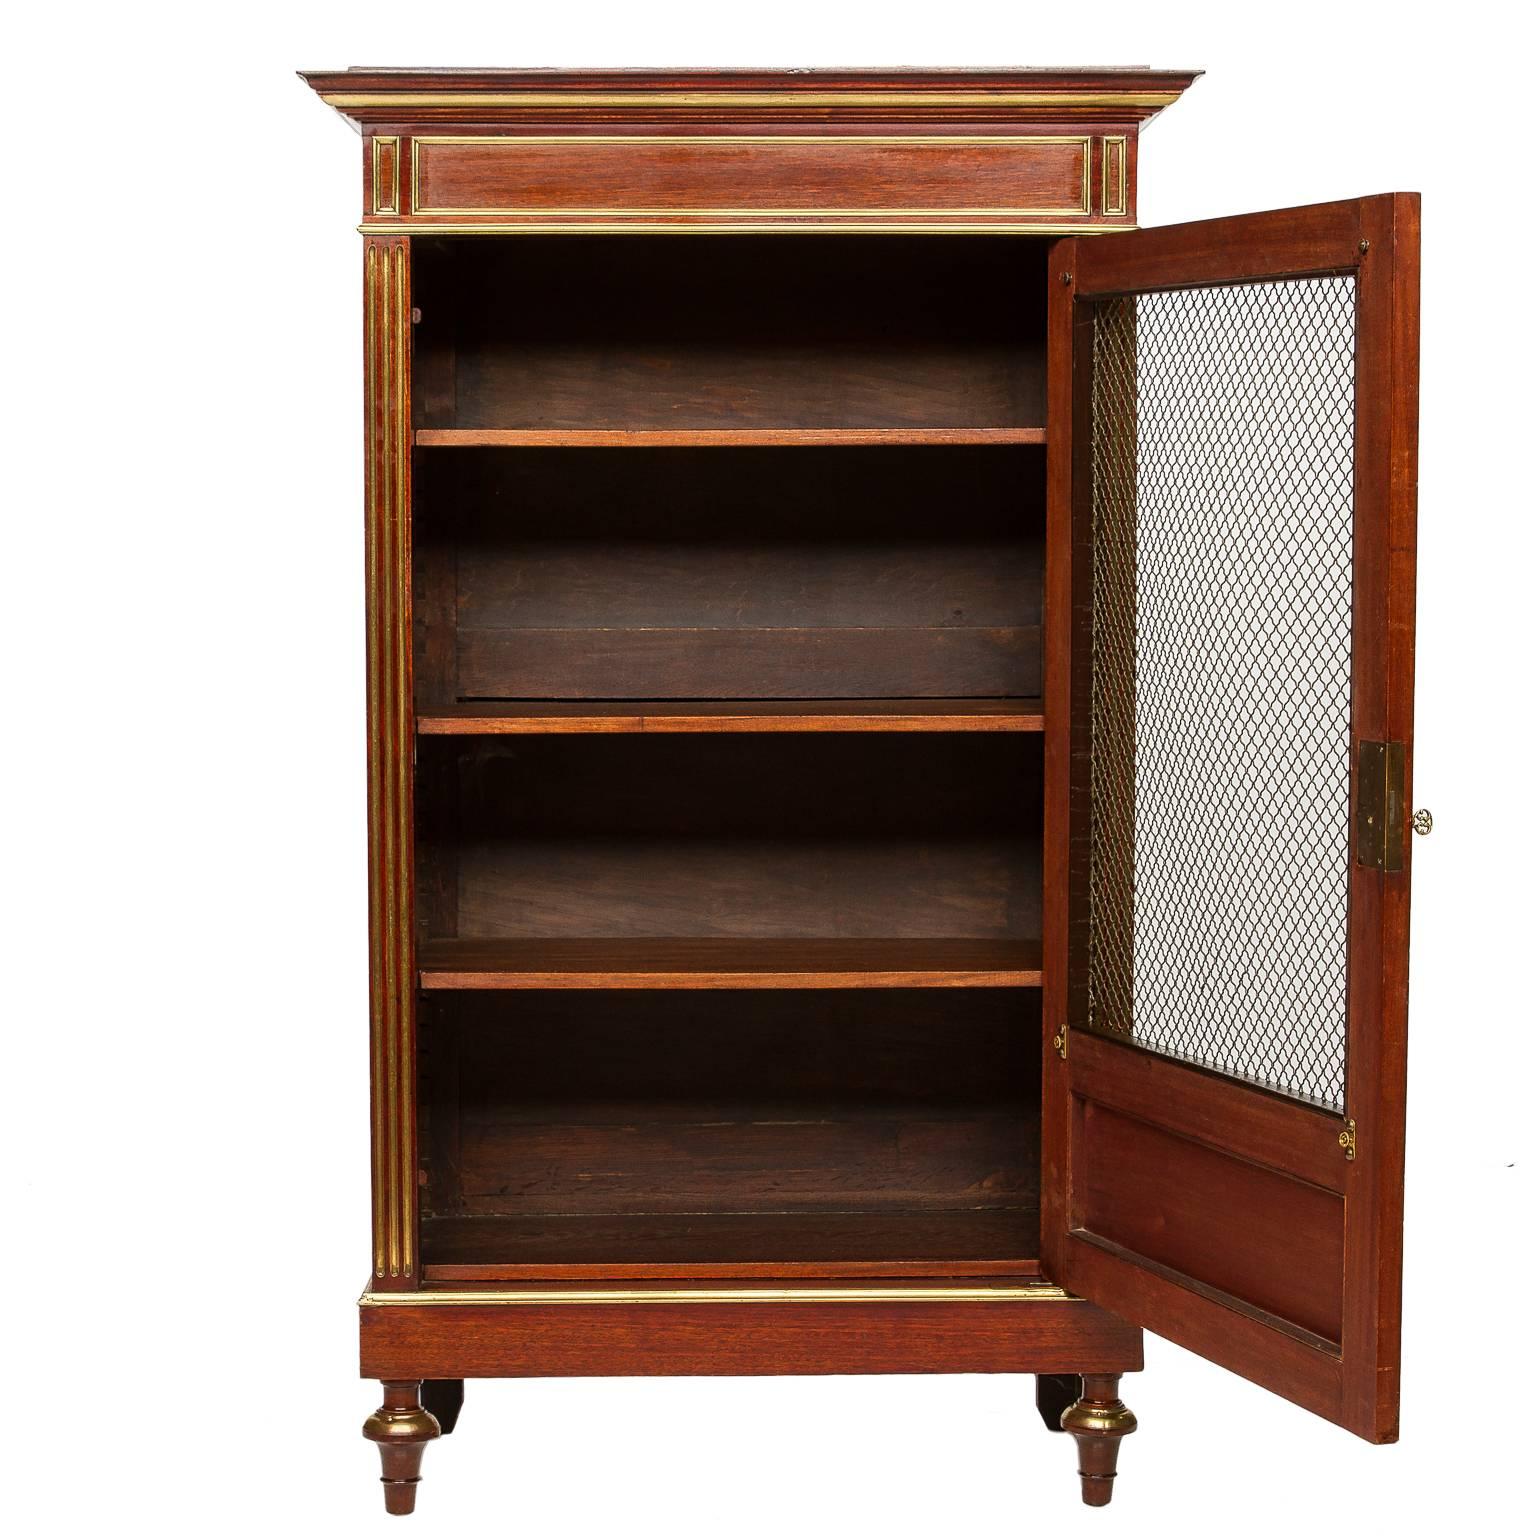 A fine example built in beautiful mahogany. Featuring recessed panels accented with brass trim, brass screen, inverted cup style front foot with brass covering. Fluted details on front casing are brass inlays which provide a wonderfully